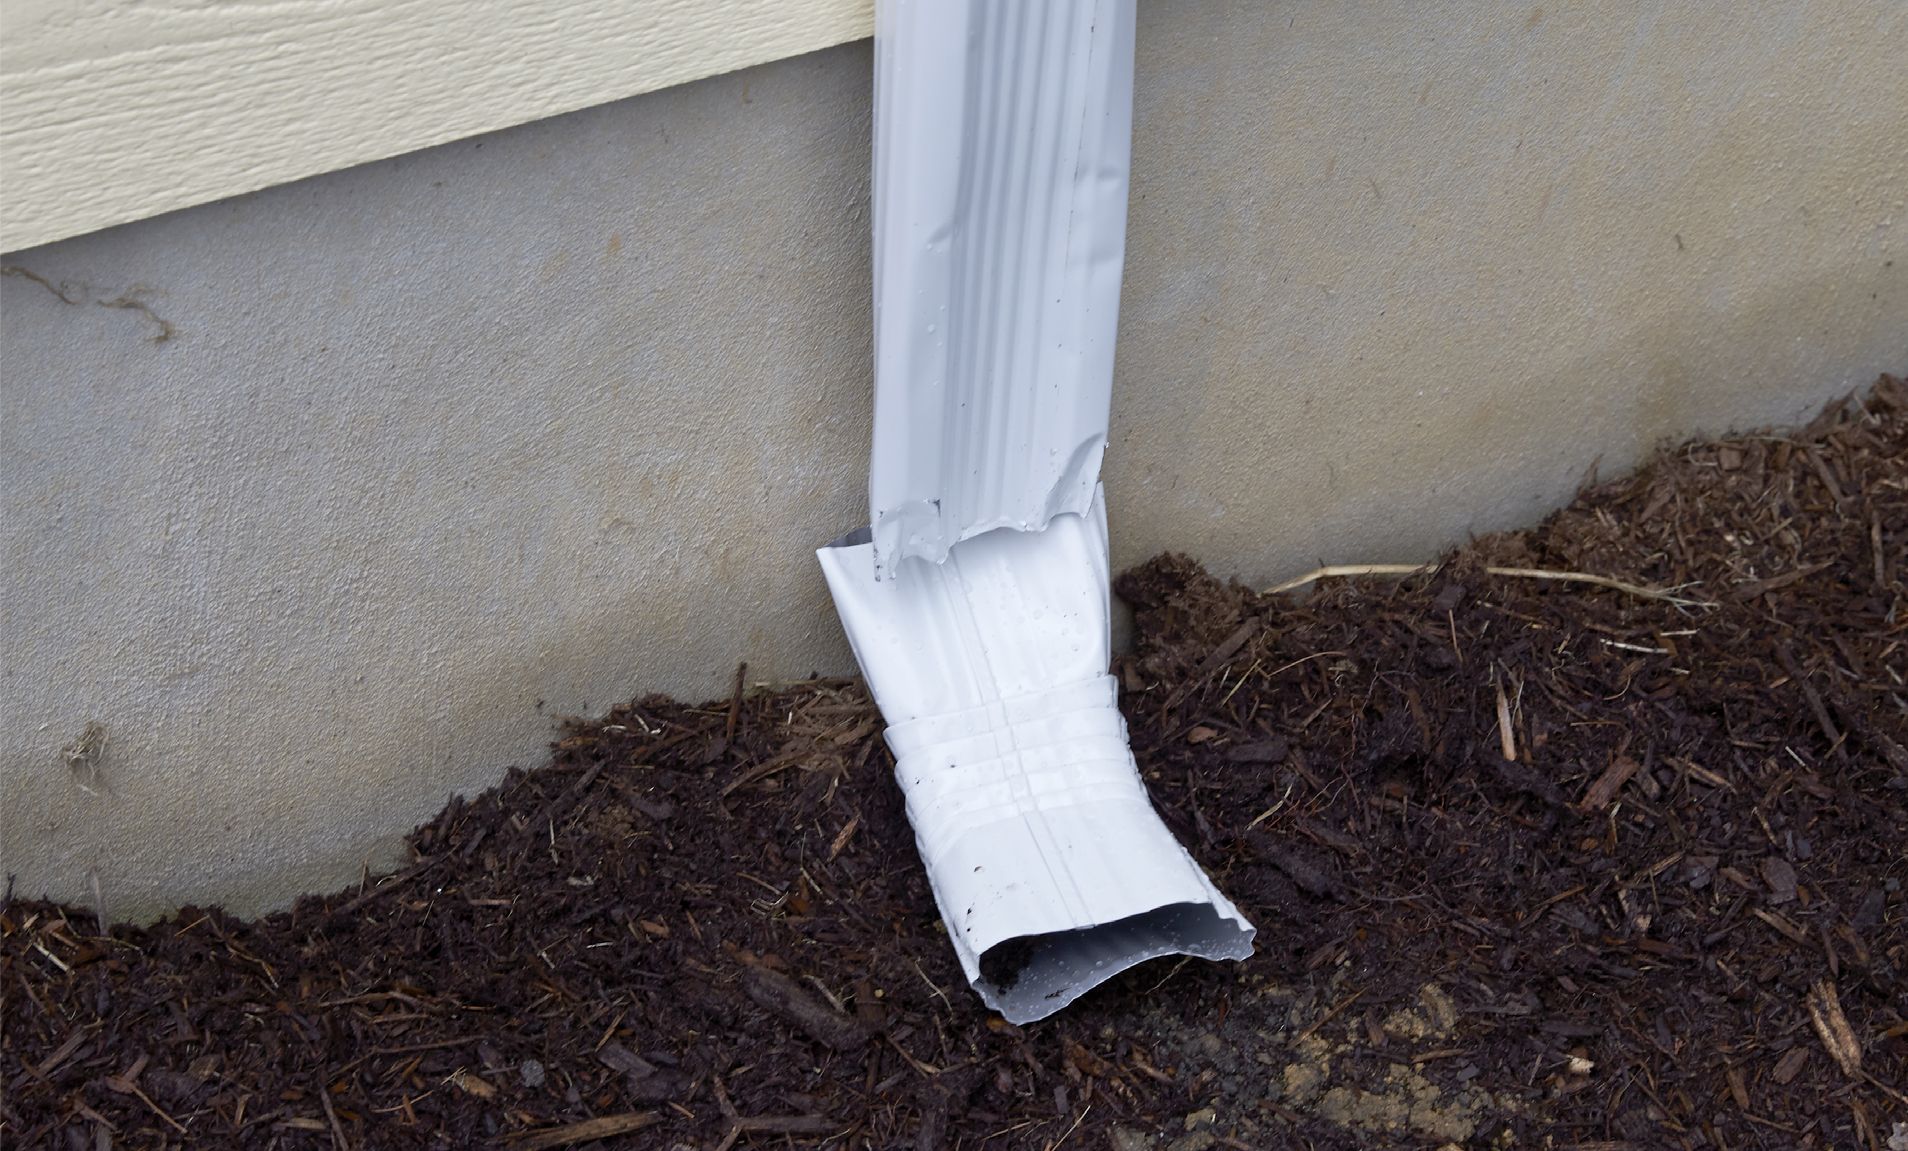 Downspout Repair in Chicago Illinois.